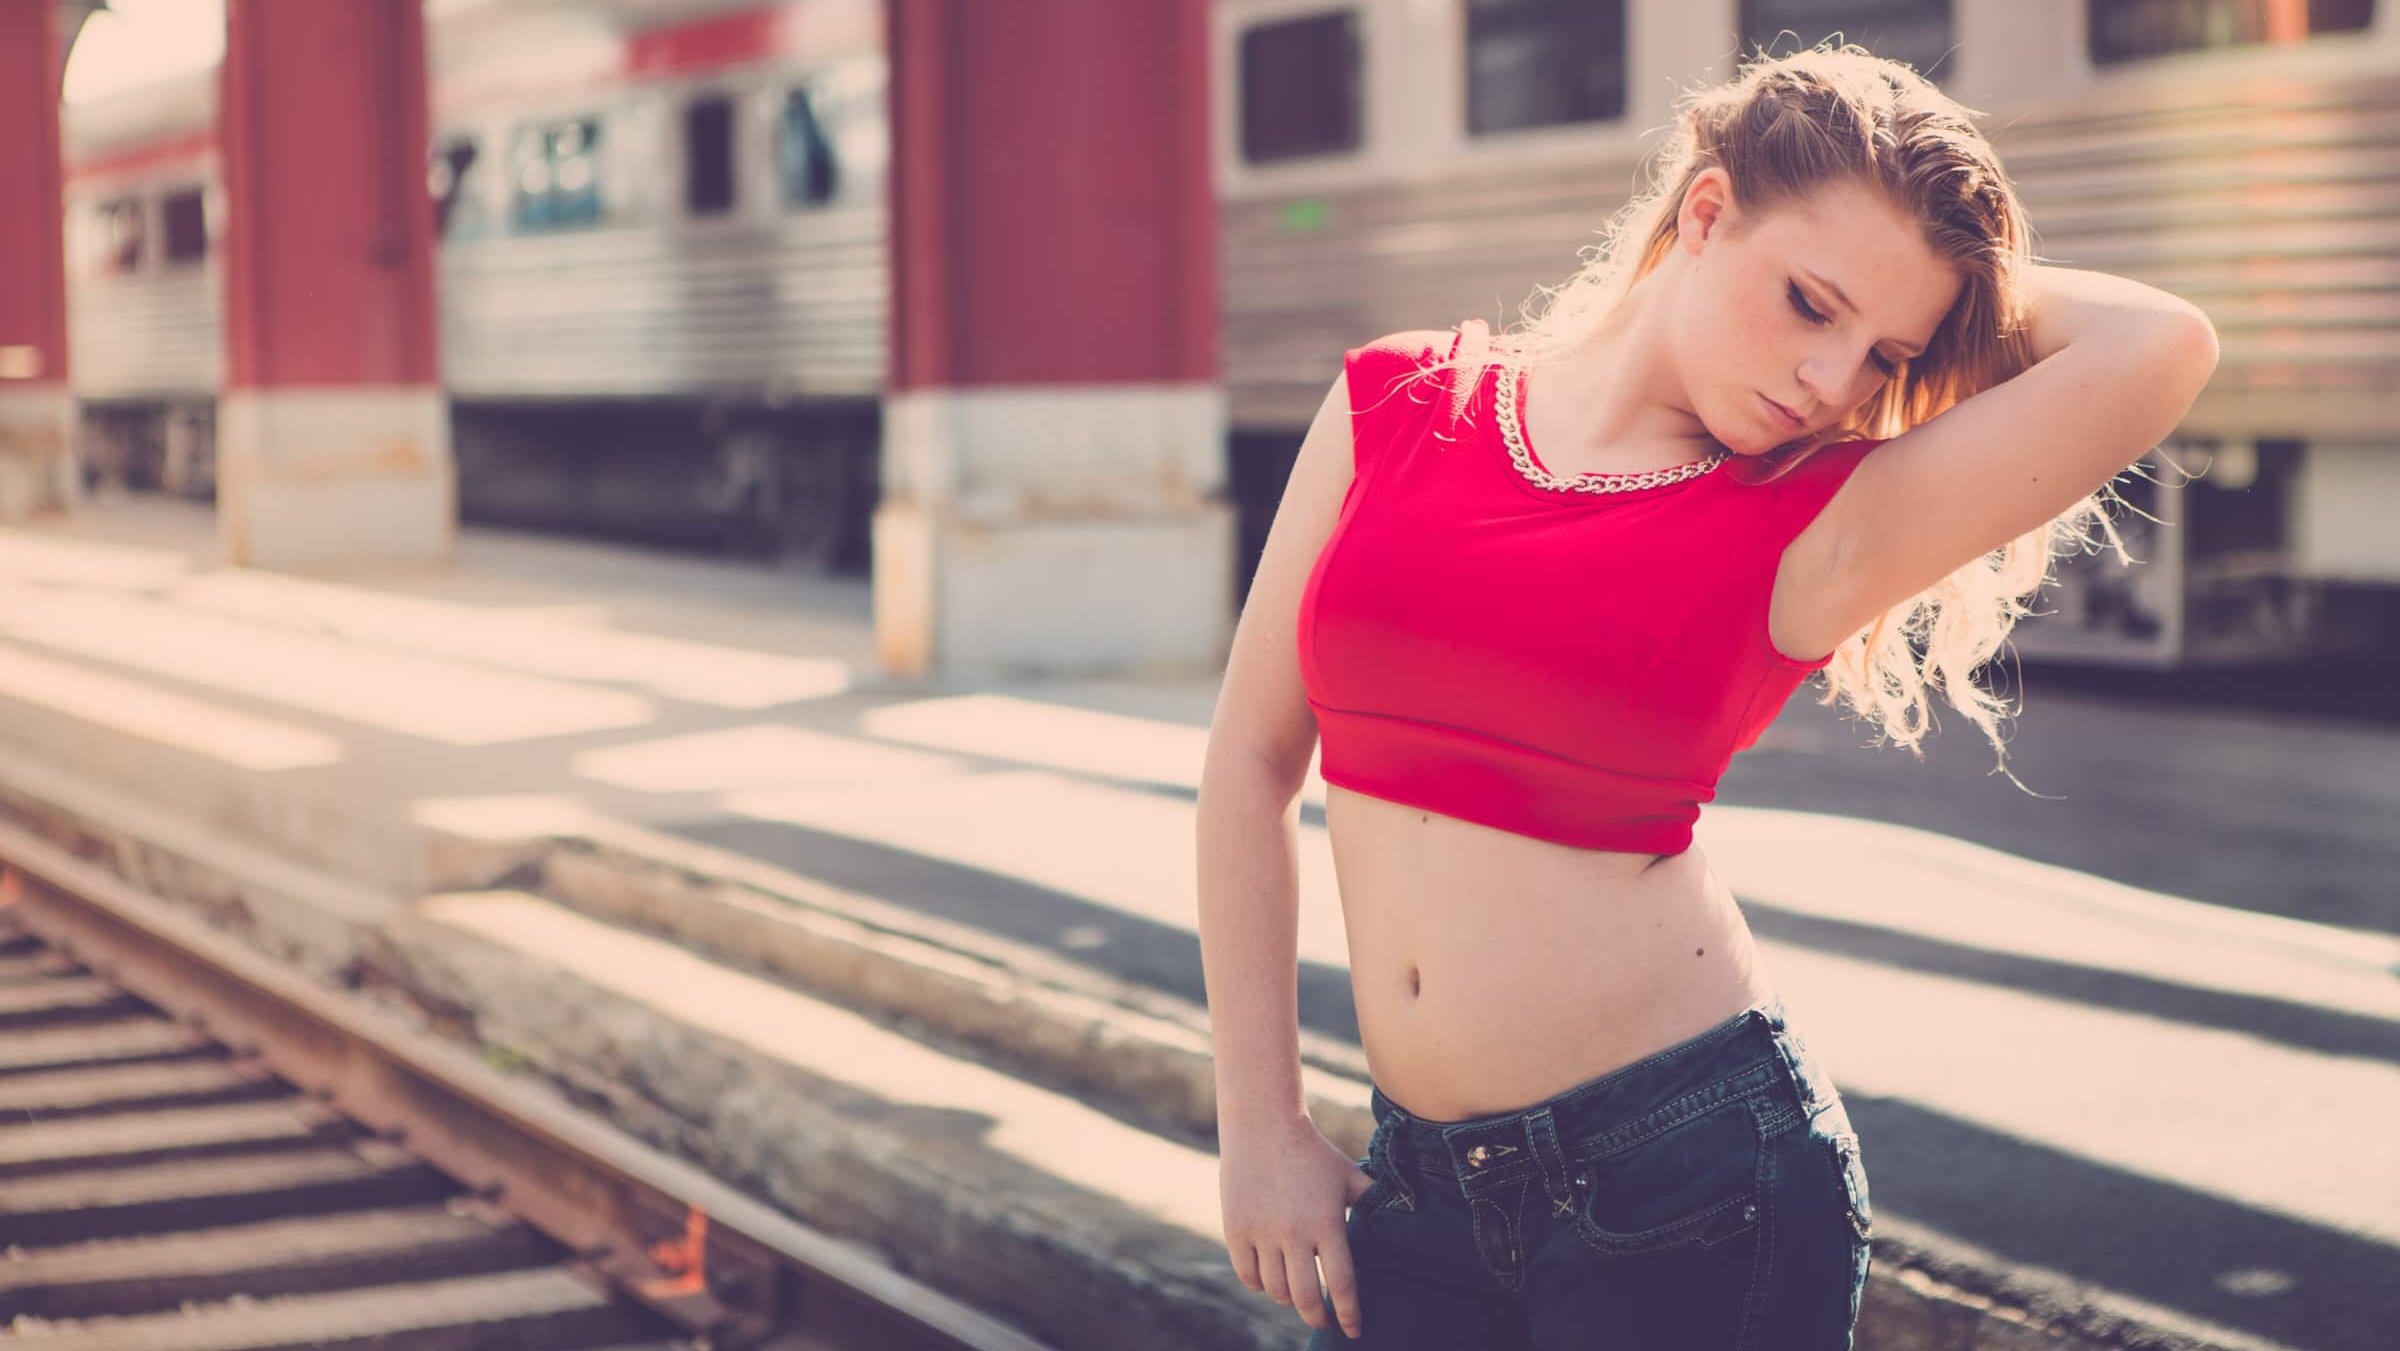 Red Shirt Crop Top Bare Midriff Low Rise Jeans Jeans Depth Of Field Blonde Blond Hair Train Train St 2400x1351